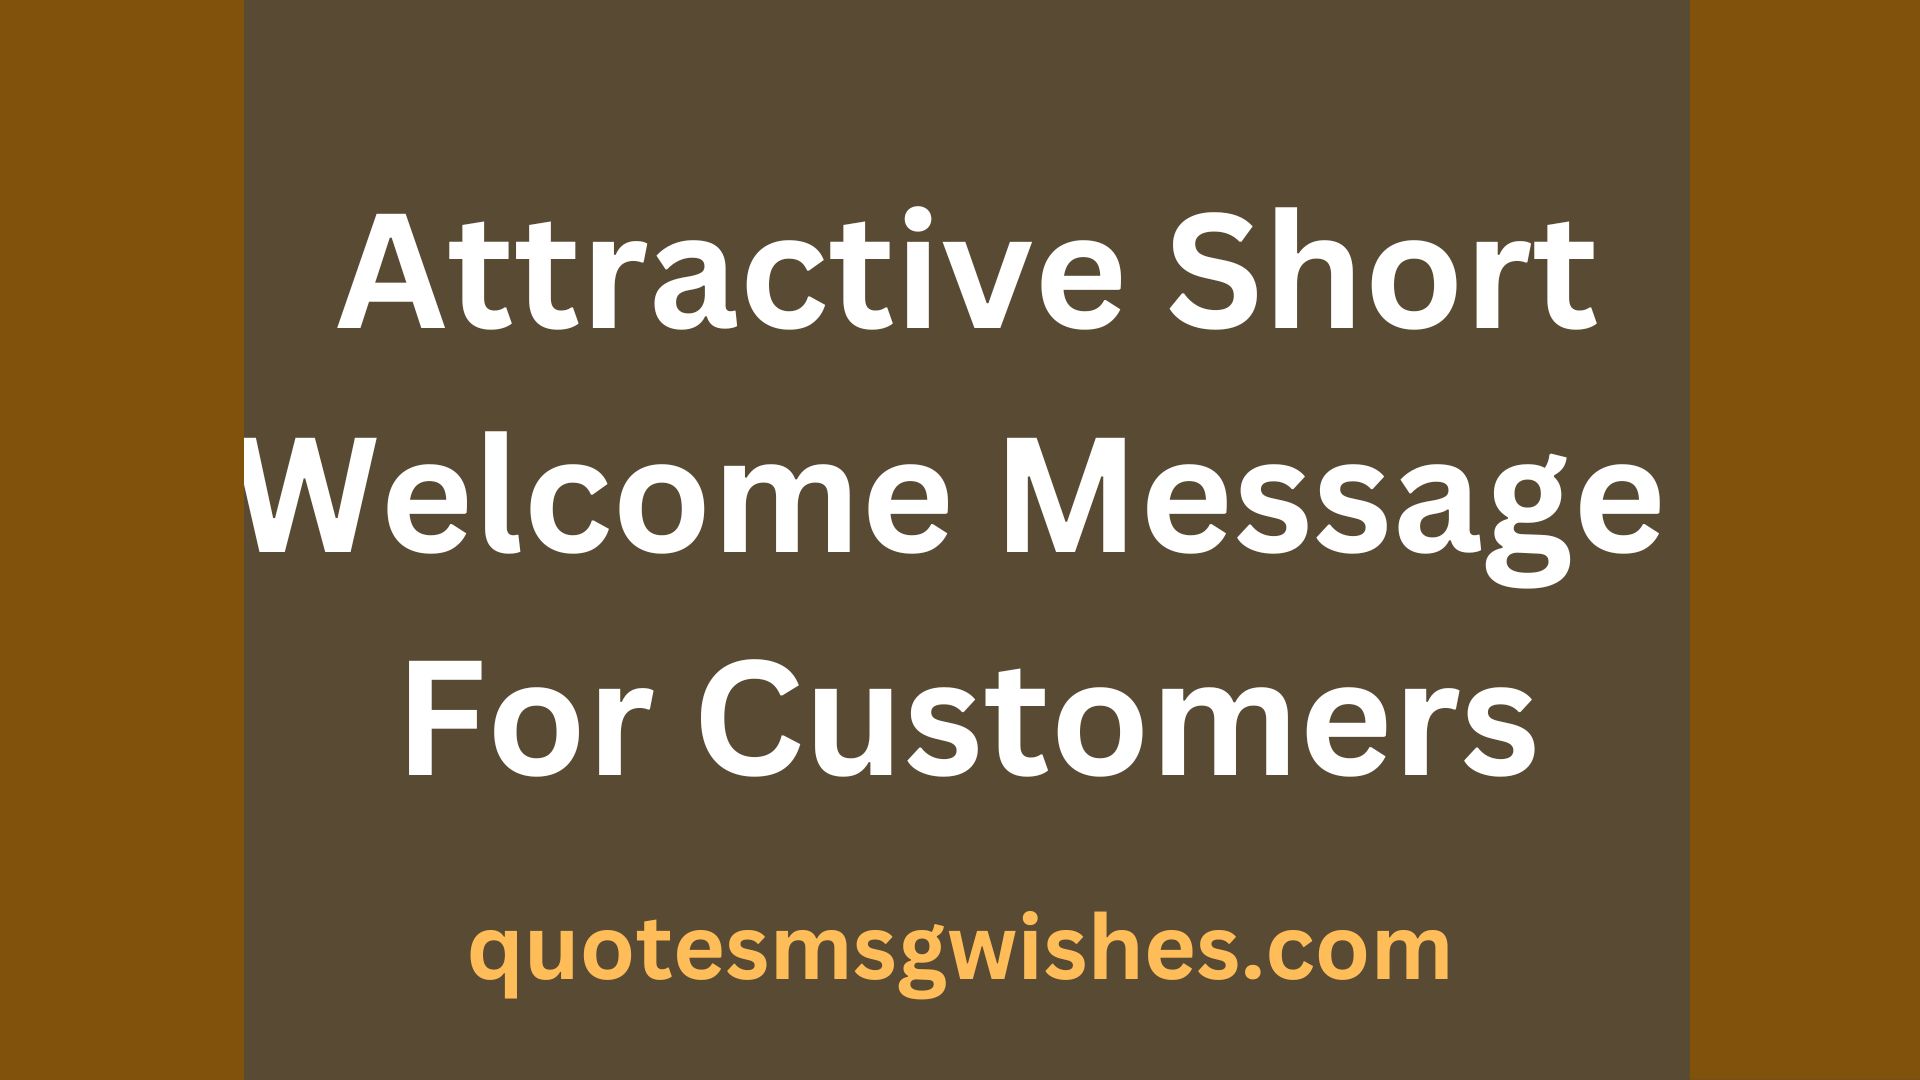 Attractive Short Welcome Message For Customers